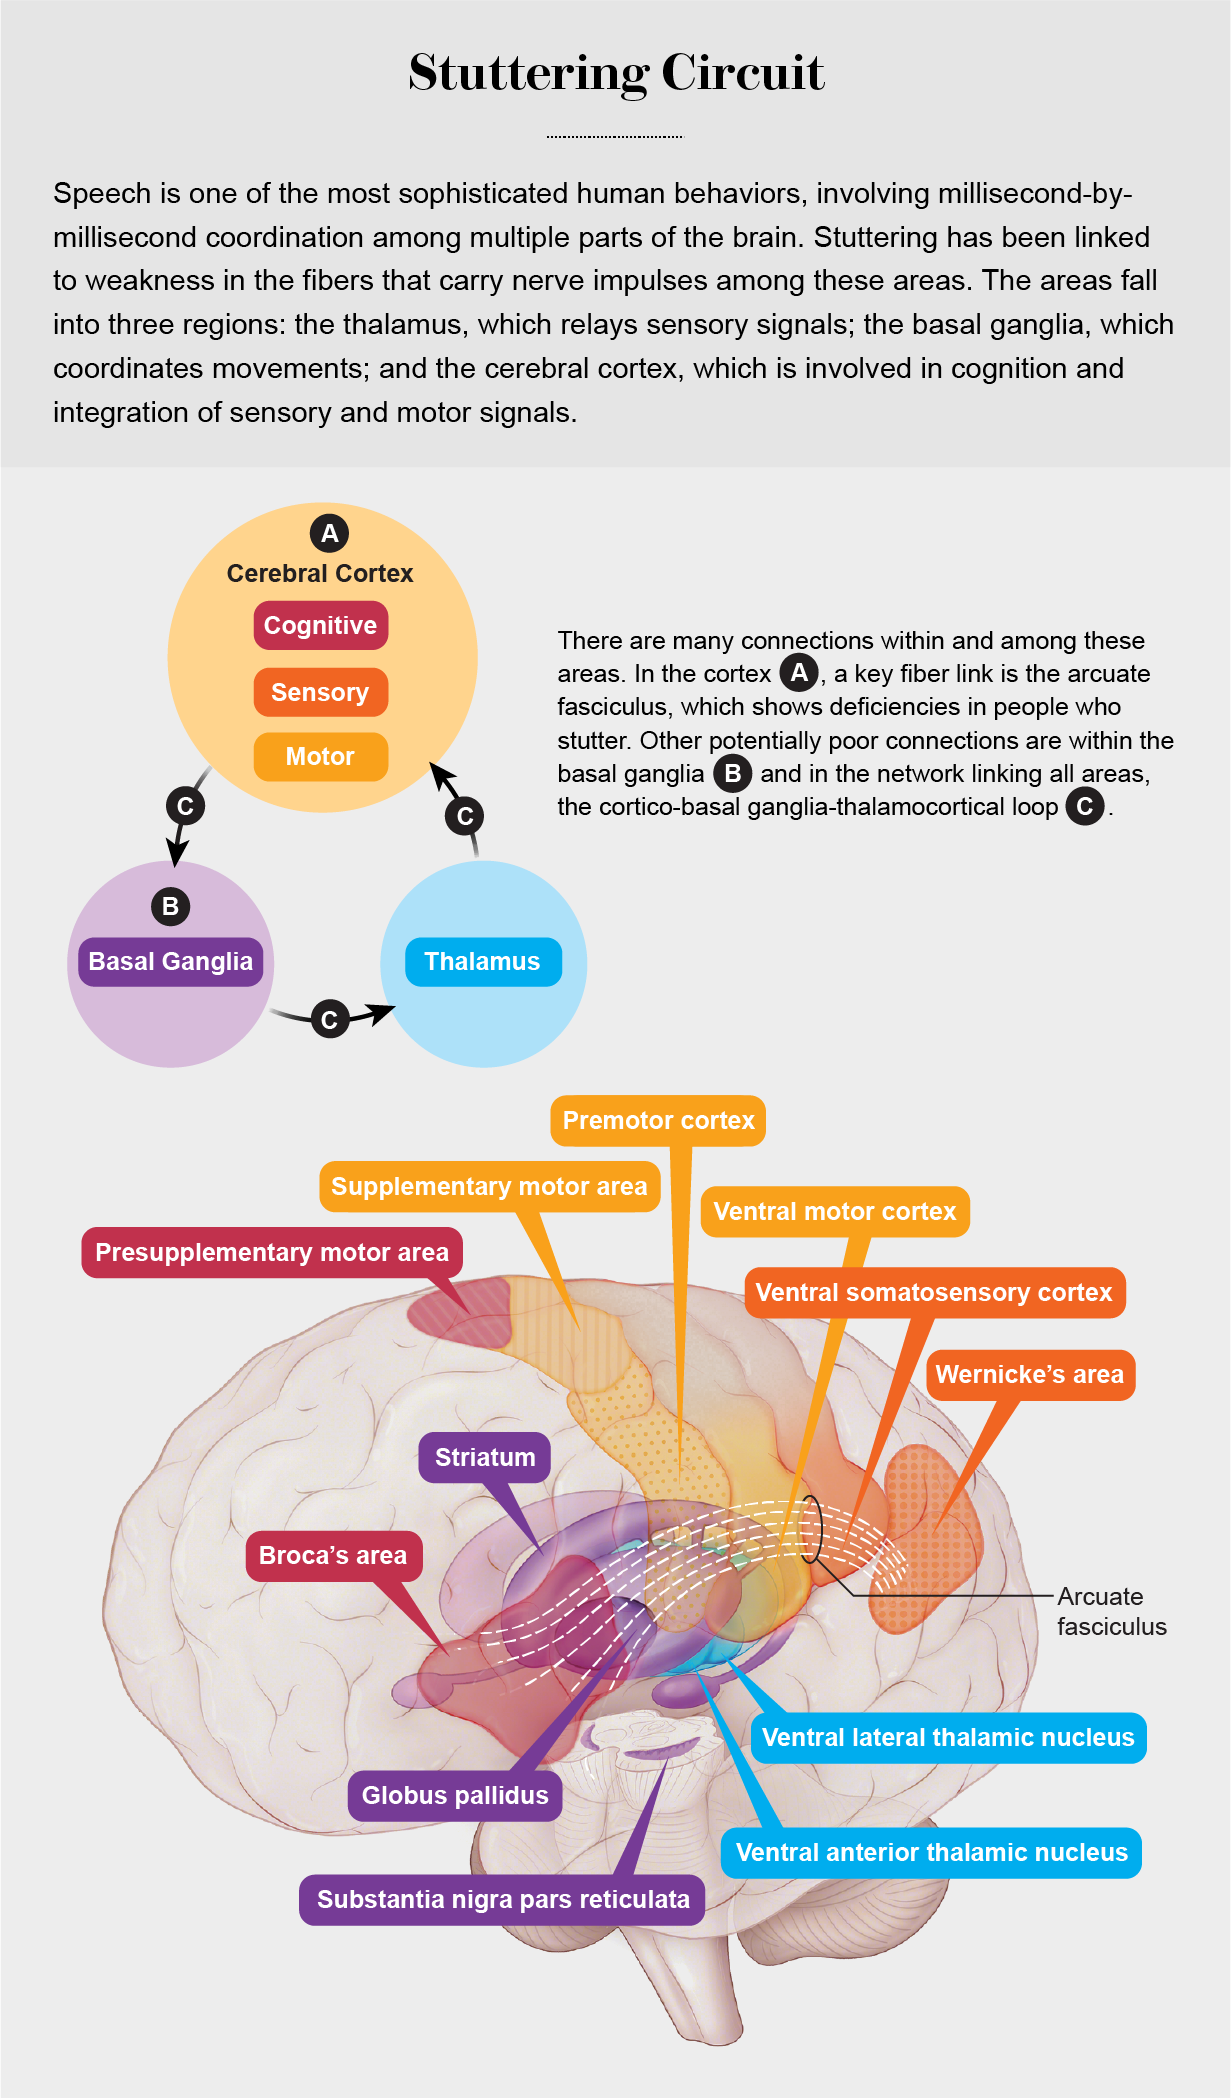 Brain diagram highlights the basal ganglia, thalamus, and key areas of the cerebral cortex involved stuttering.